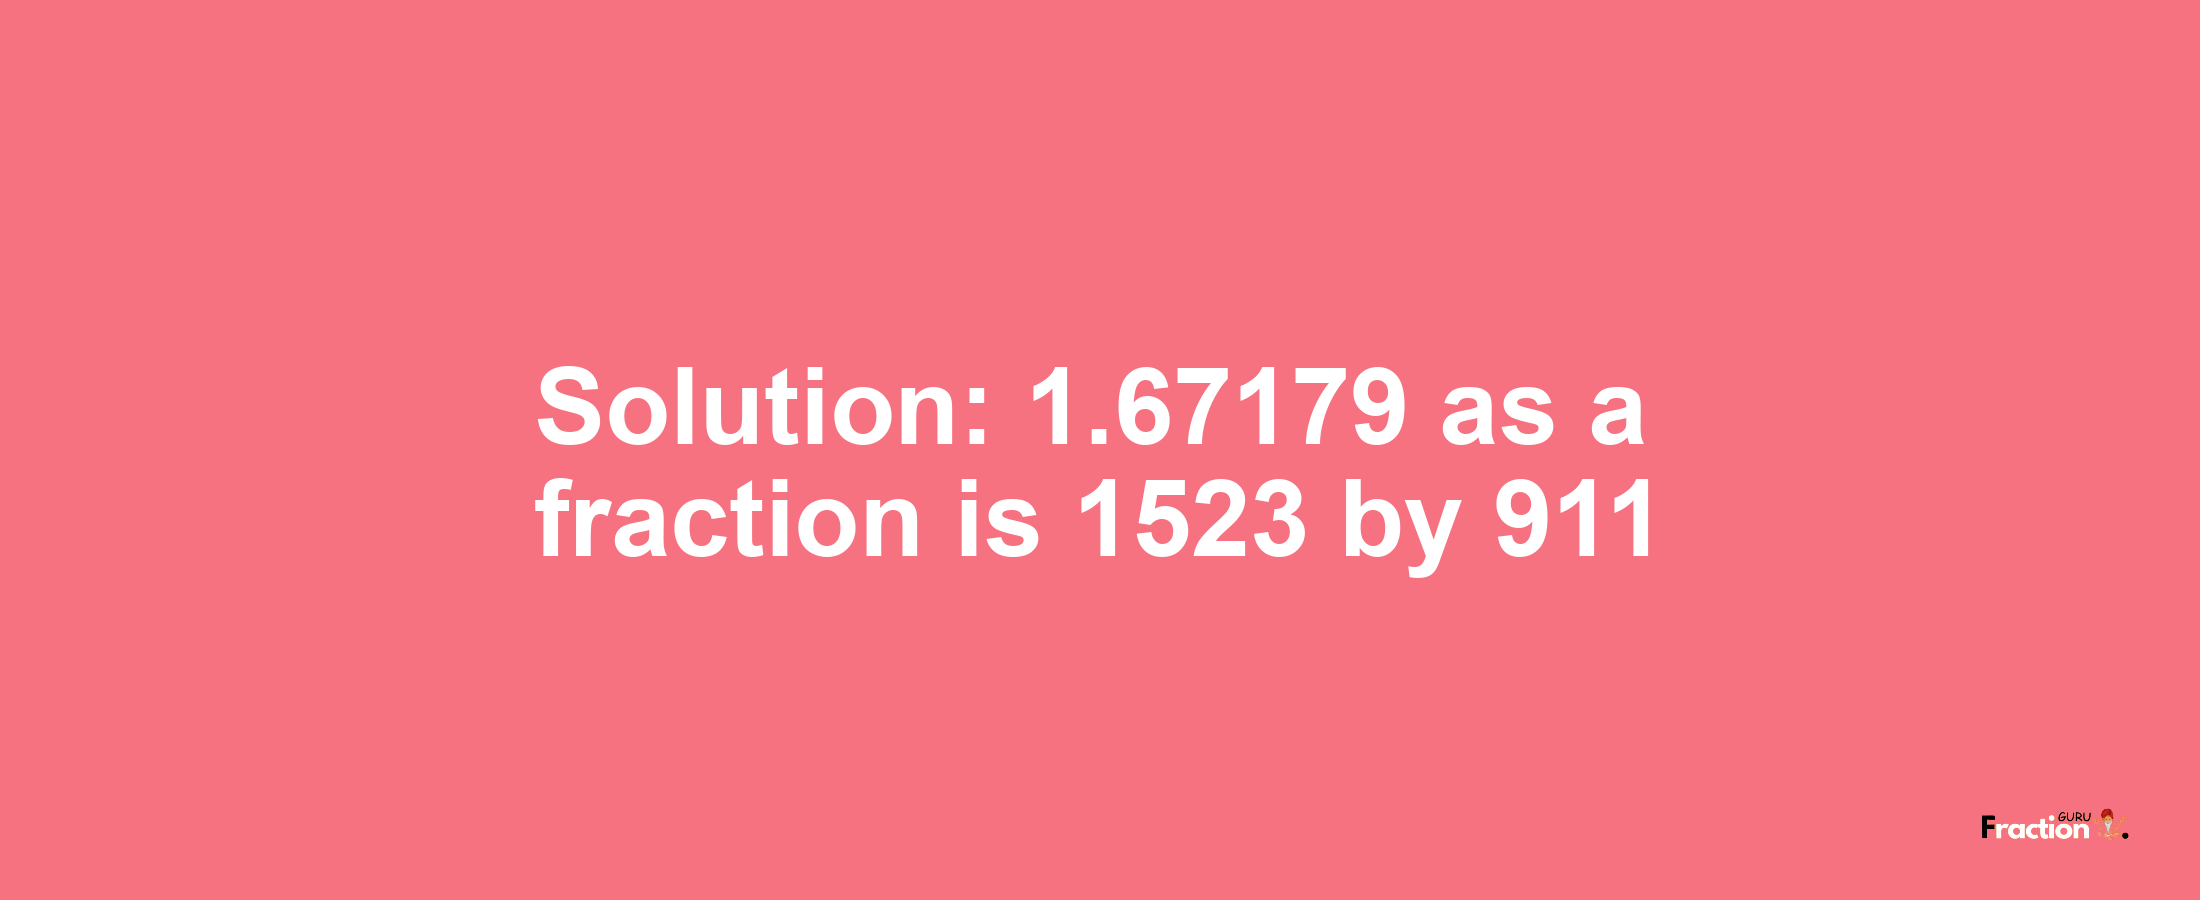 Solution:1.67179 as a fraction is 1523/911